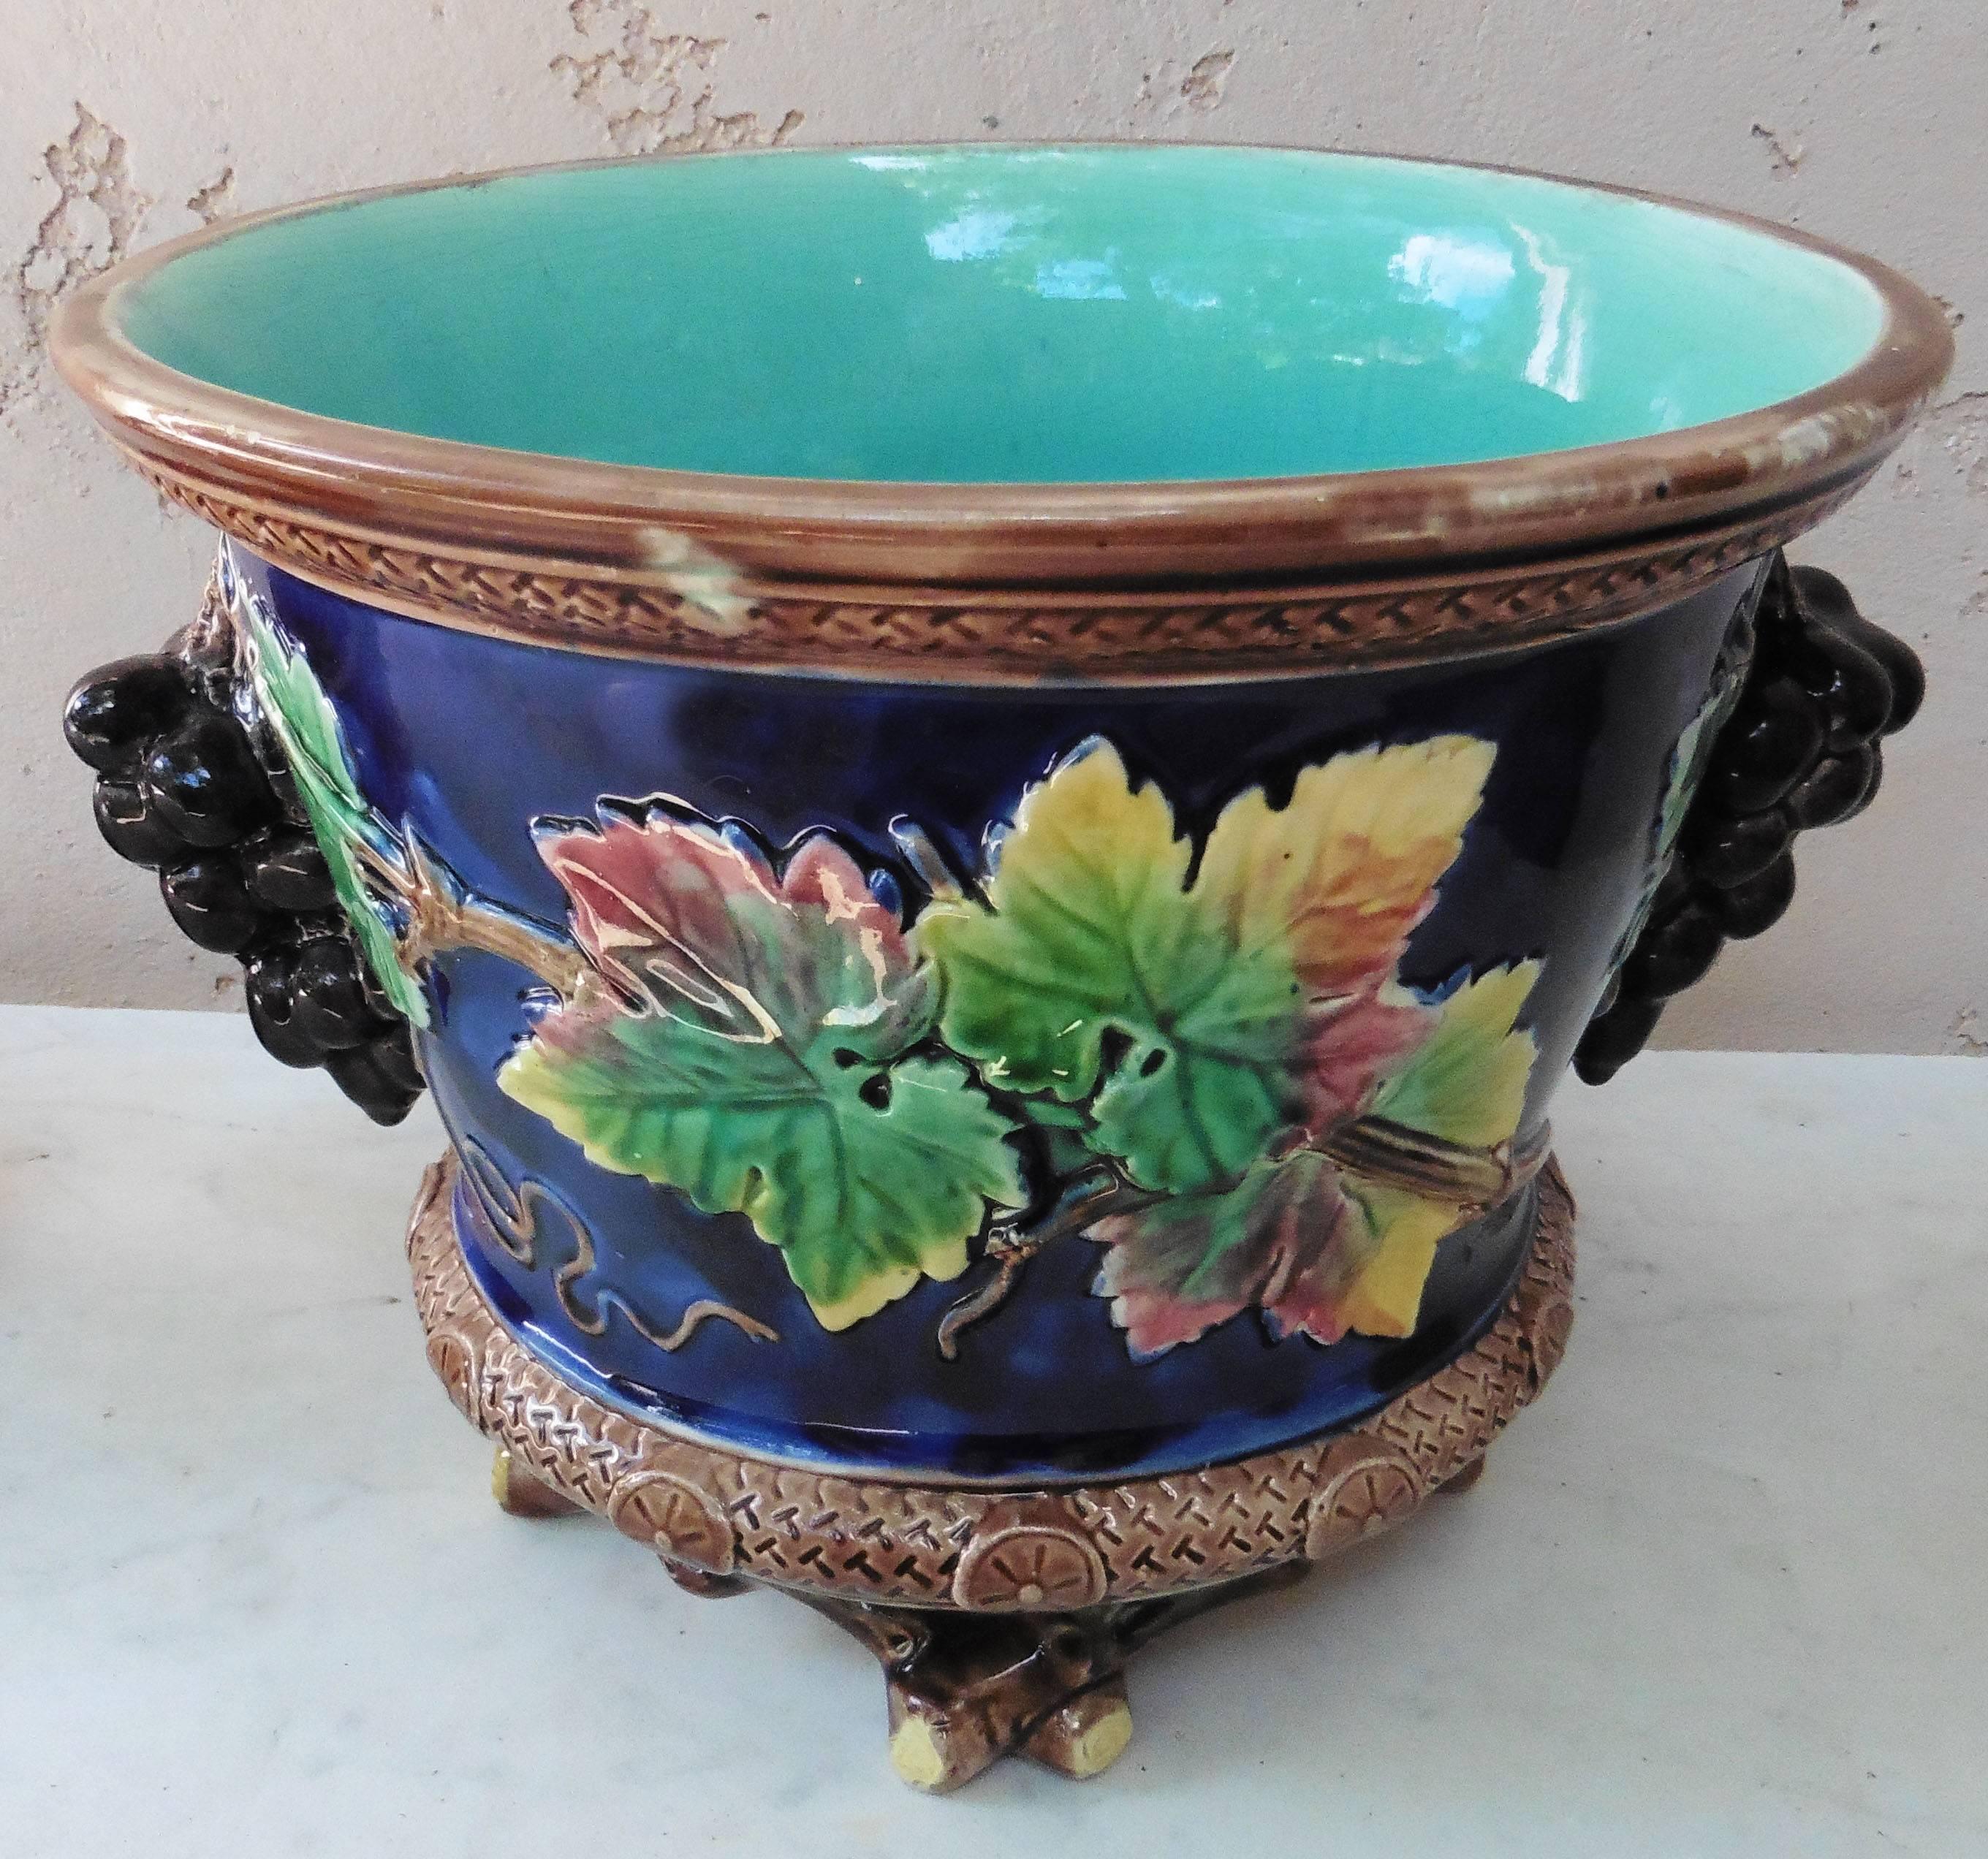 Colorful English Victorian jardinière cache pot with grapes leaves and grapes handles, circa 1880.